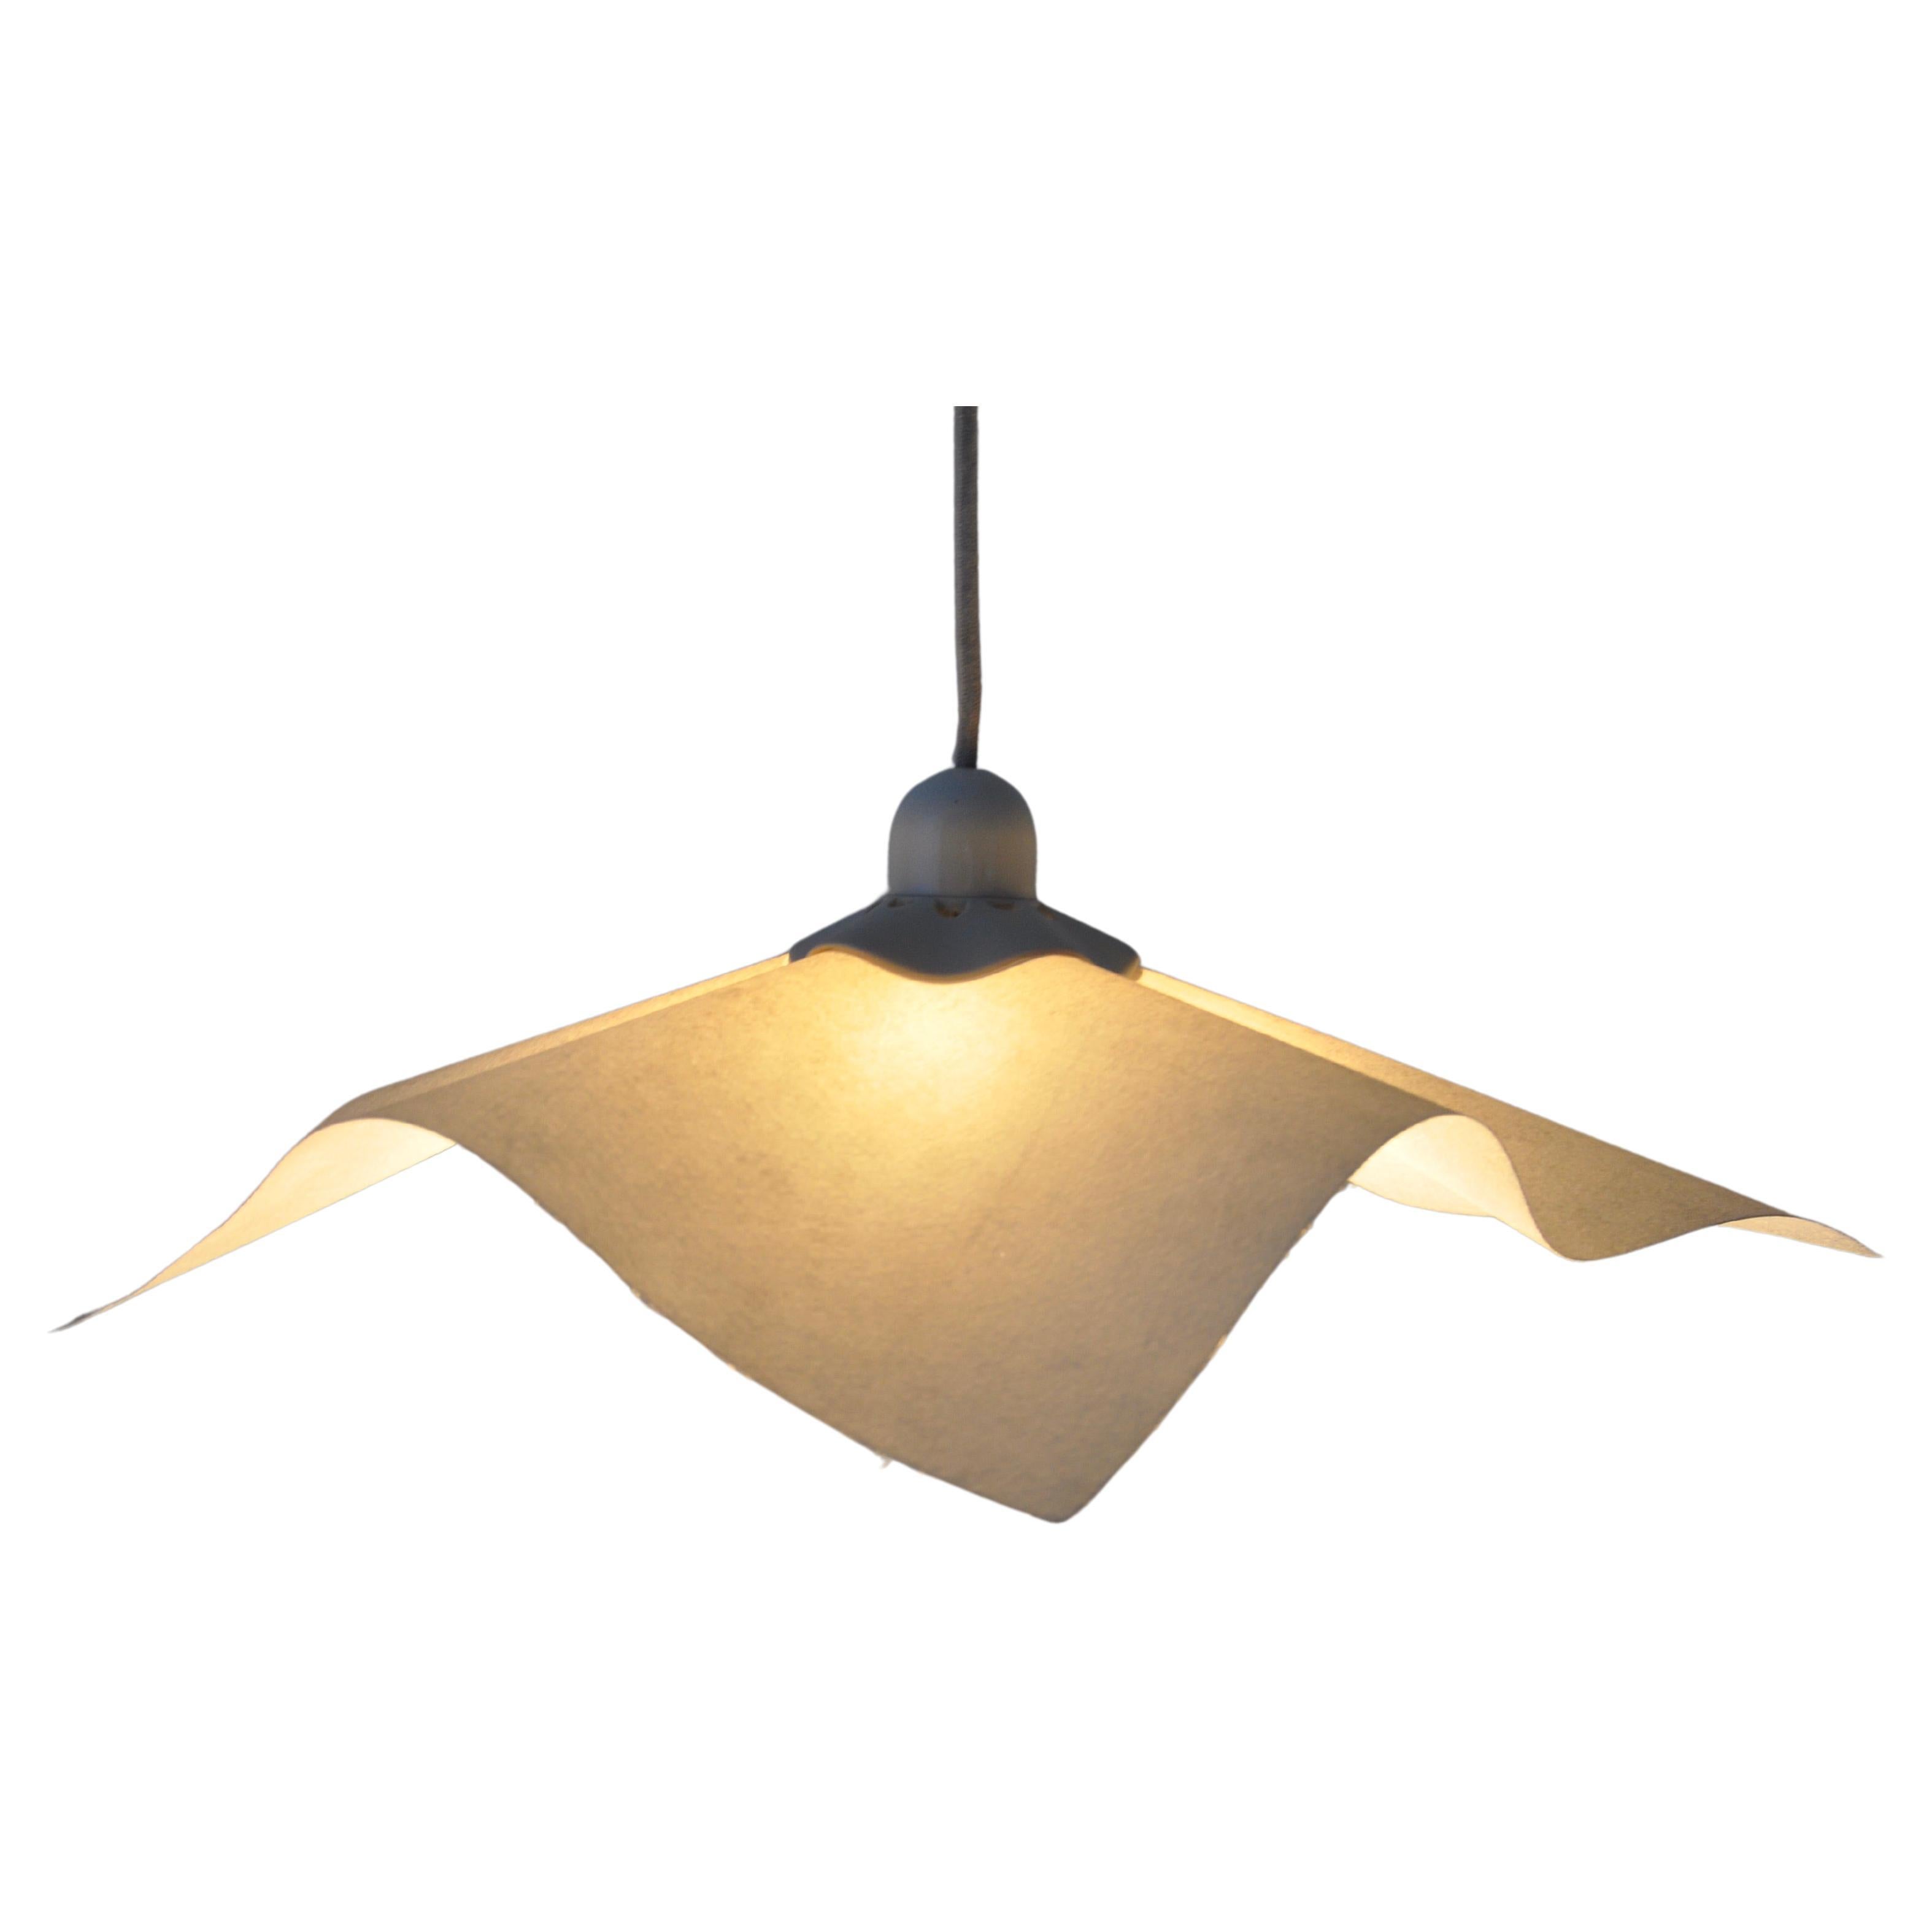 Area 50 Hanging Lamp by Mario Bellini for Artemide, 1960s For Sale